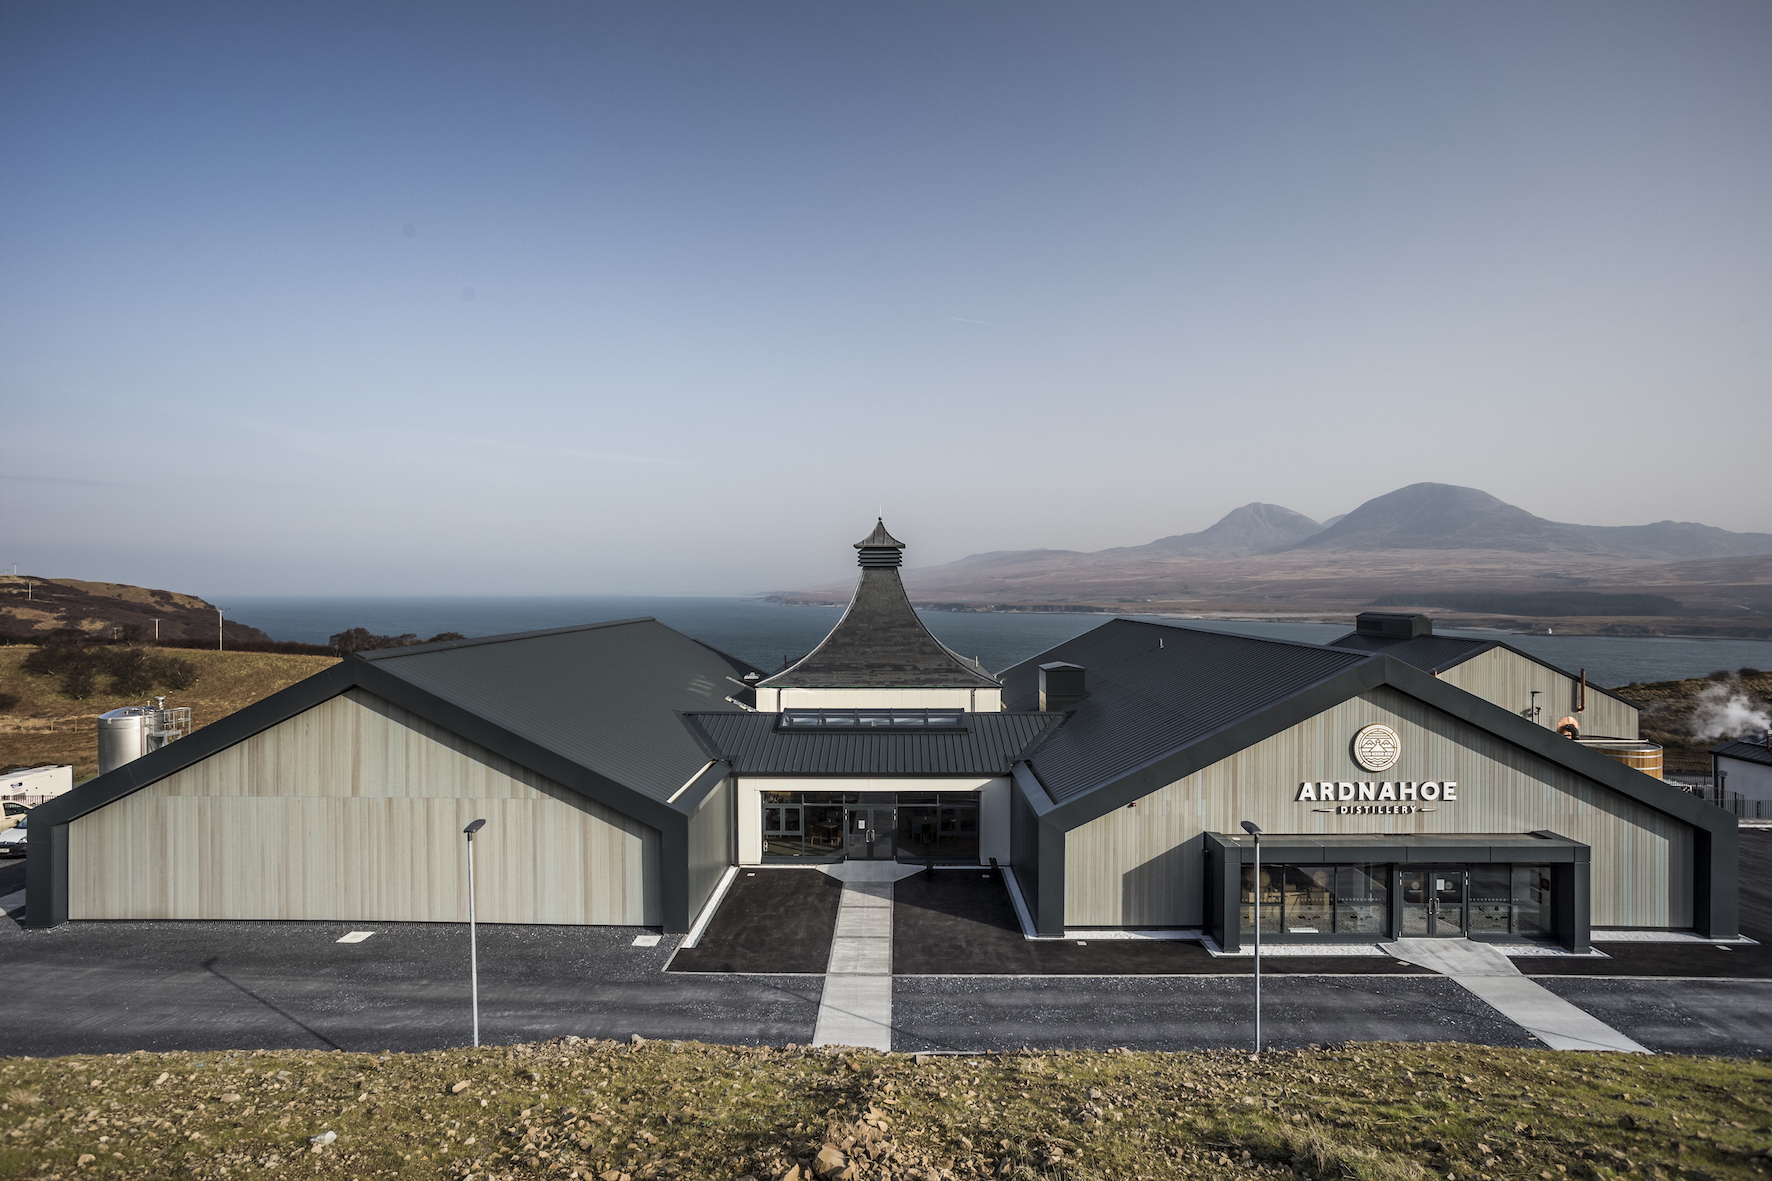 Ardnahoe Distillery opens after £12m investment